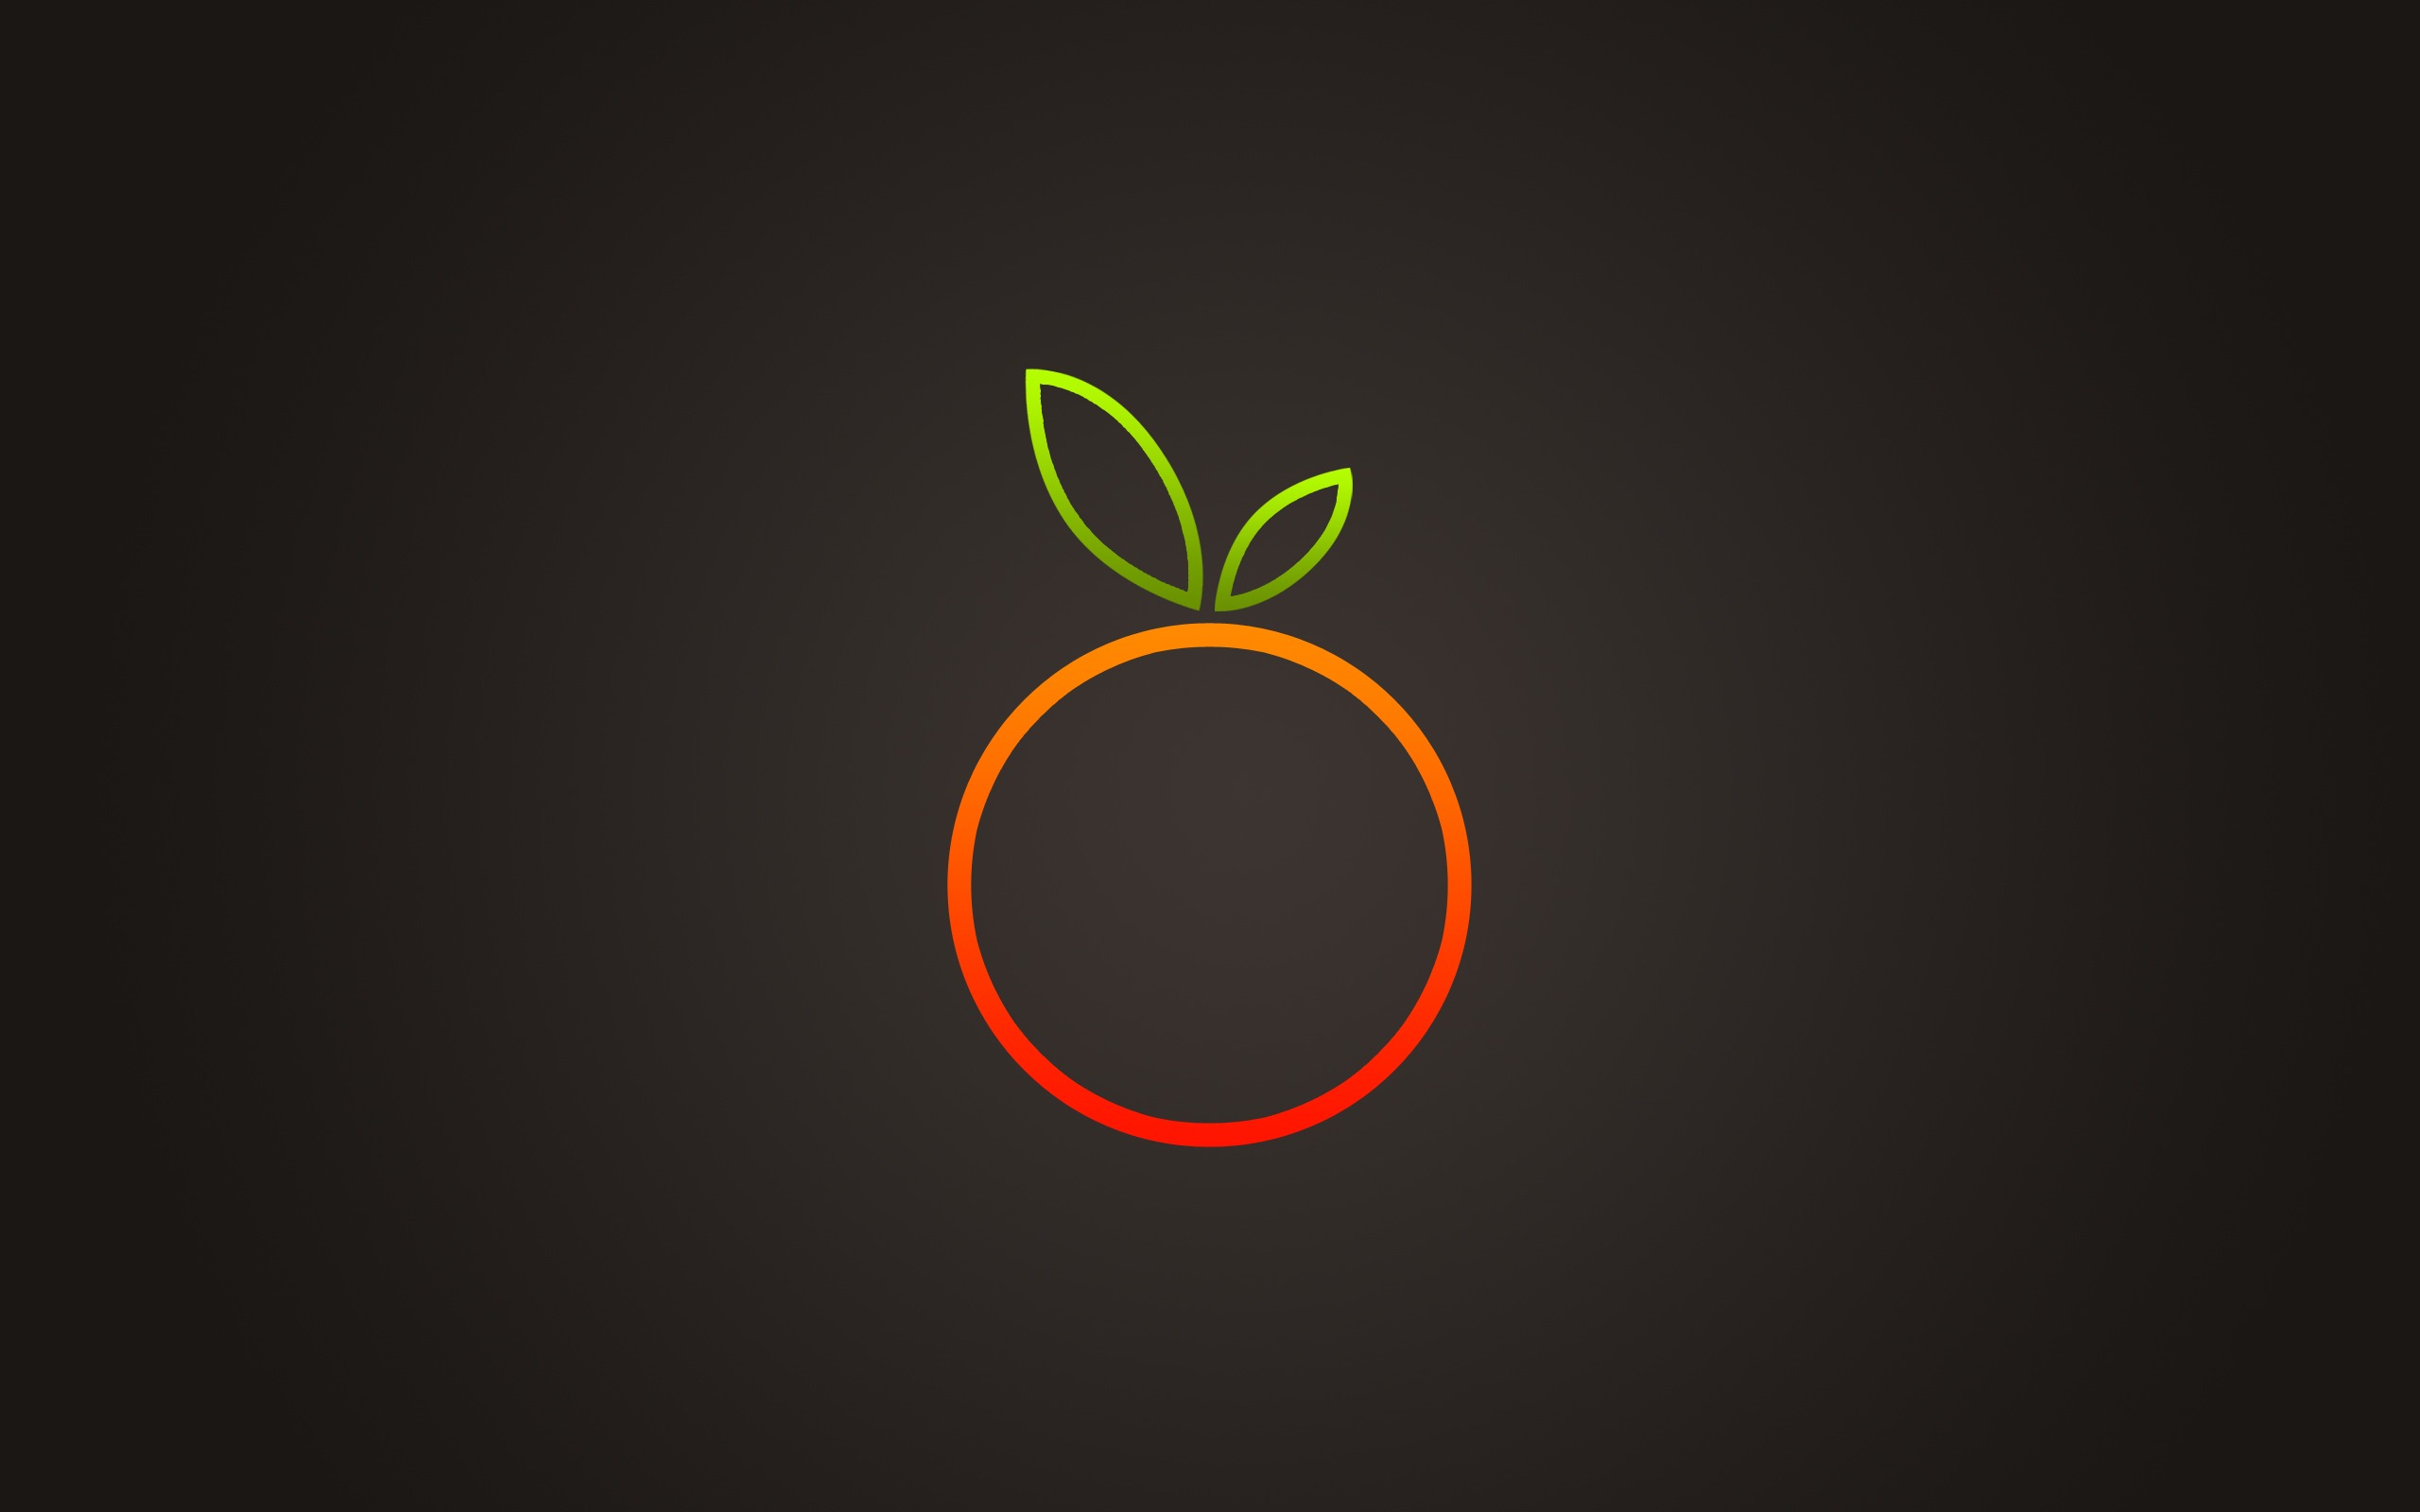 Orange logo wallpapers and images - wallpapers, pictures, photos